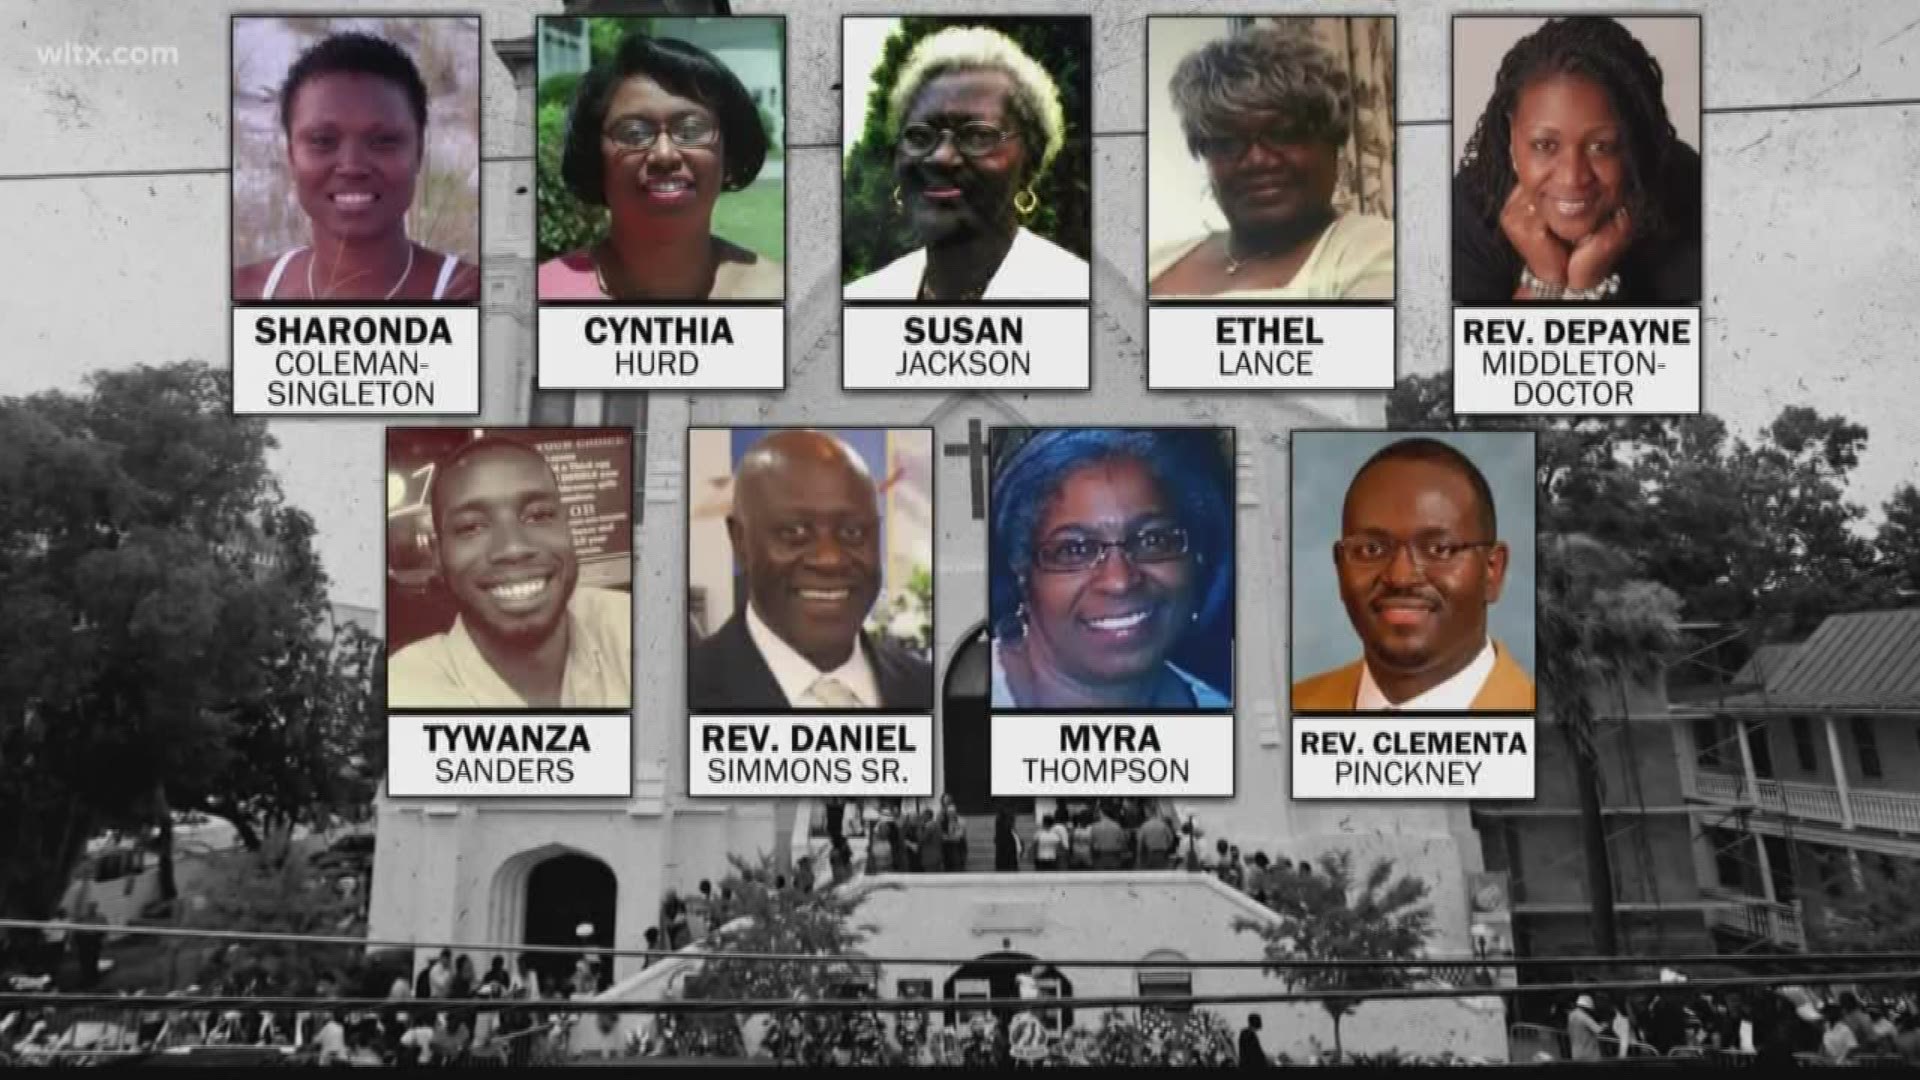 Plans are moving forward to construct a memorial to the nine African American worshipers who were killed at a South Carolina church.